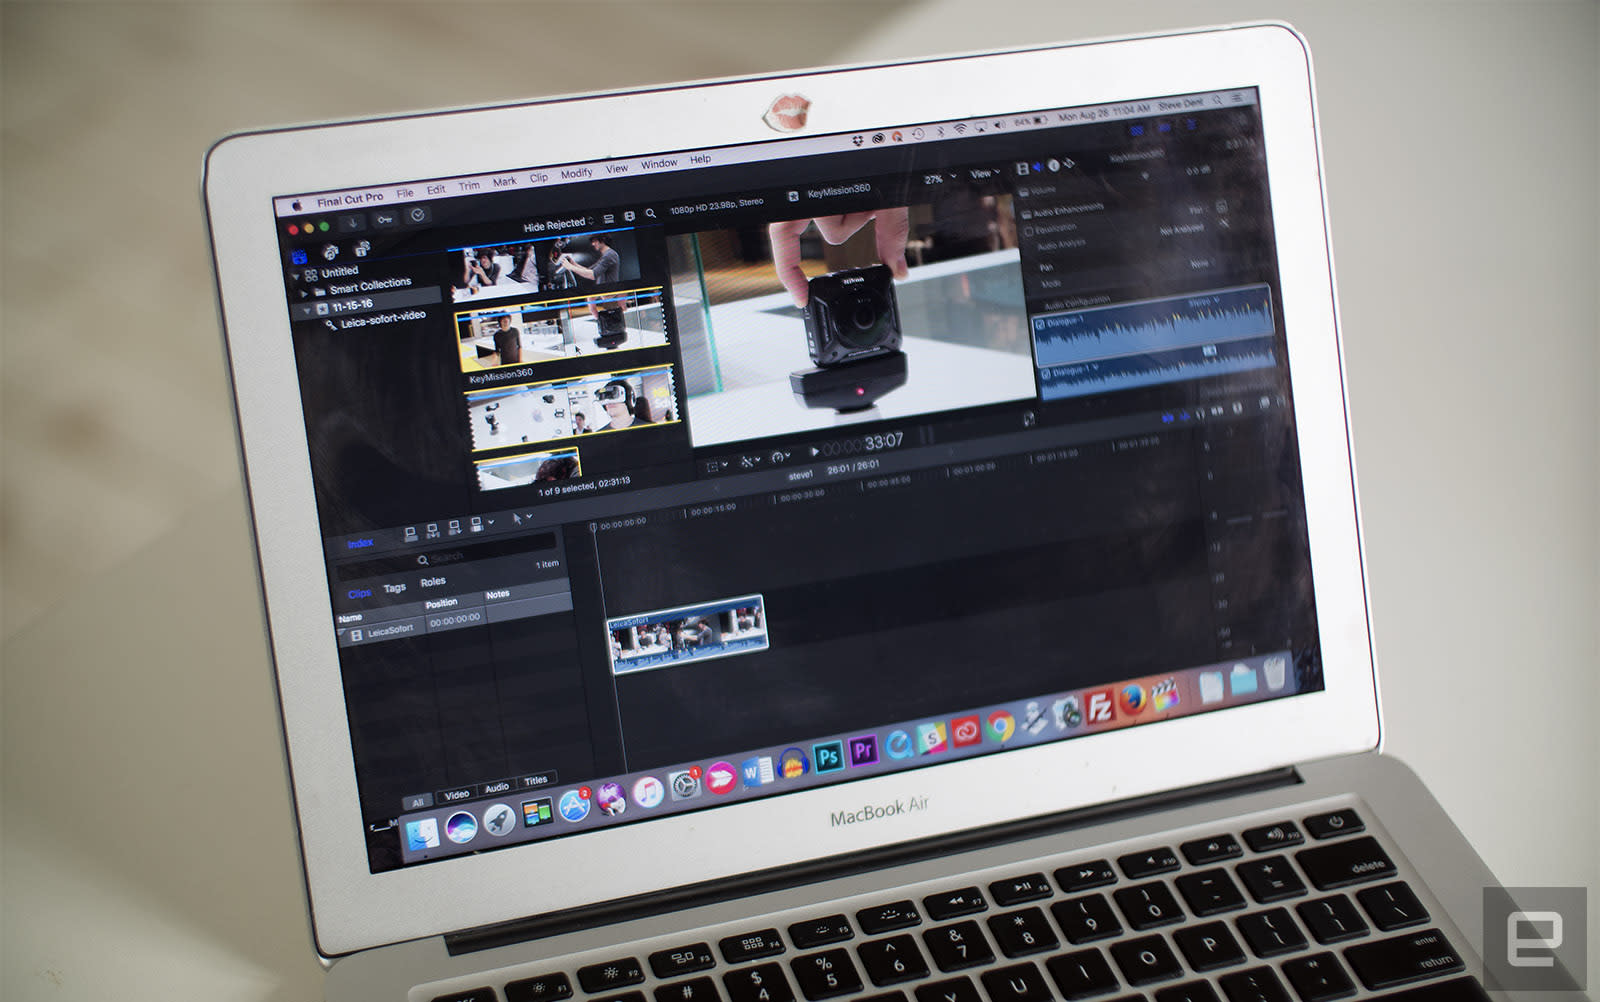 Apple Final Cut Pro 7 For Os X 10.11.6